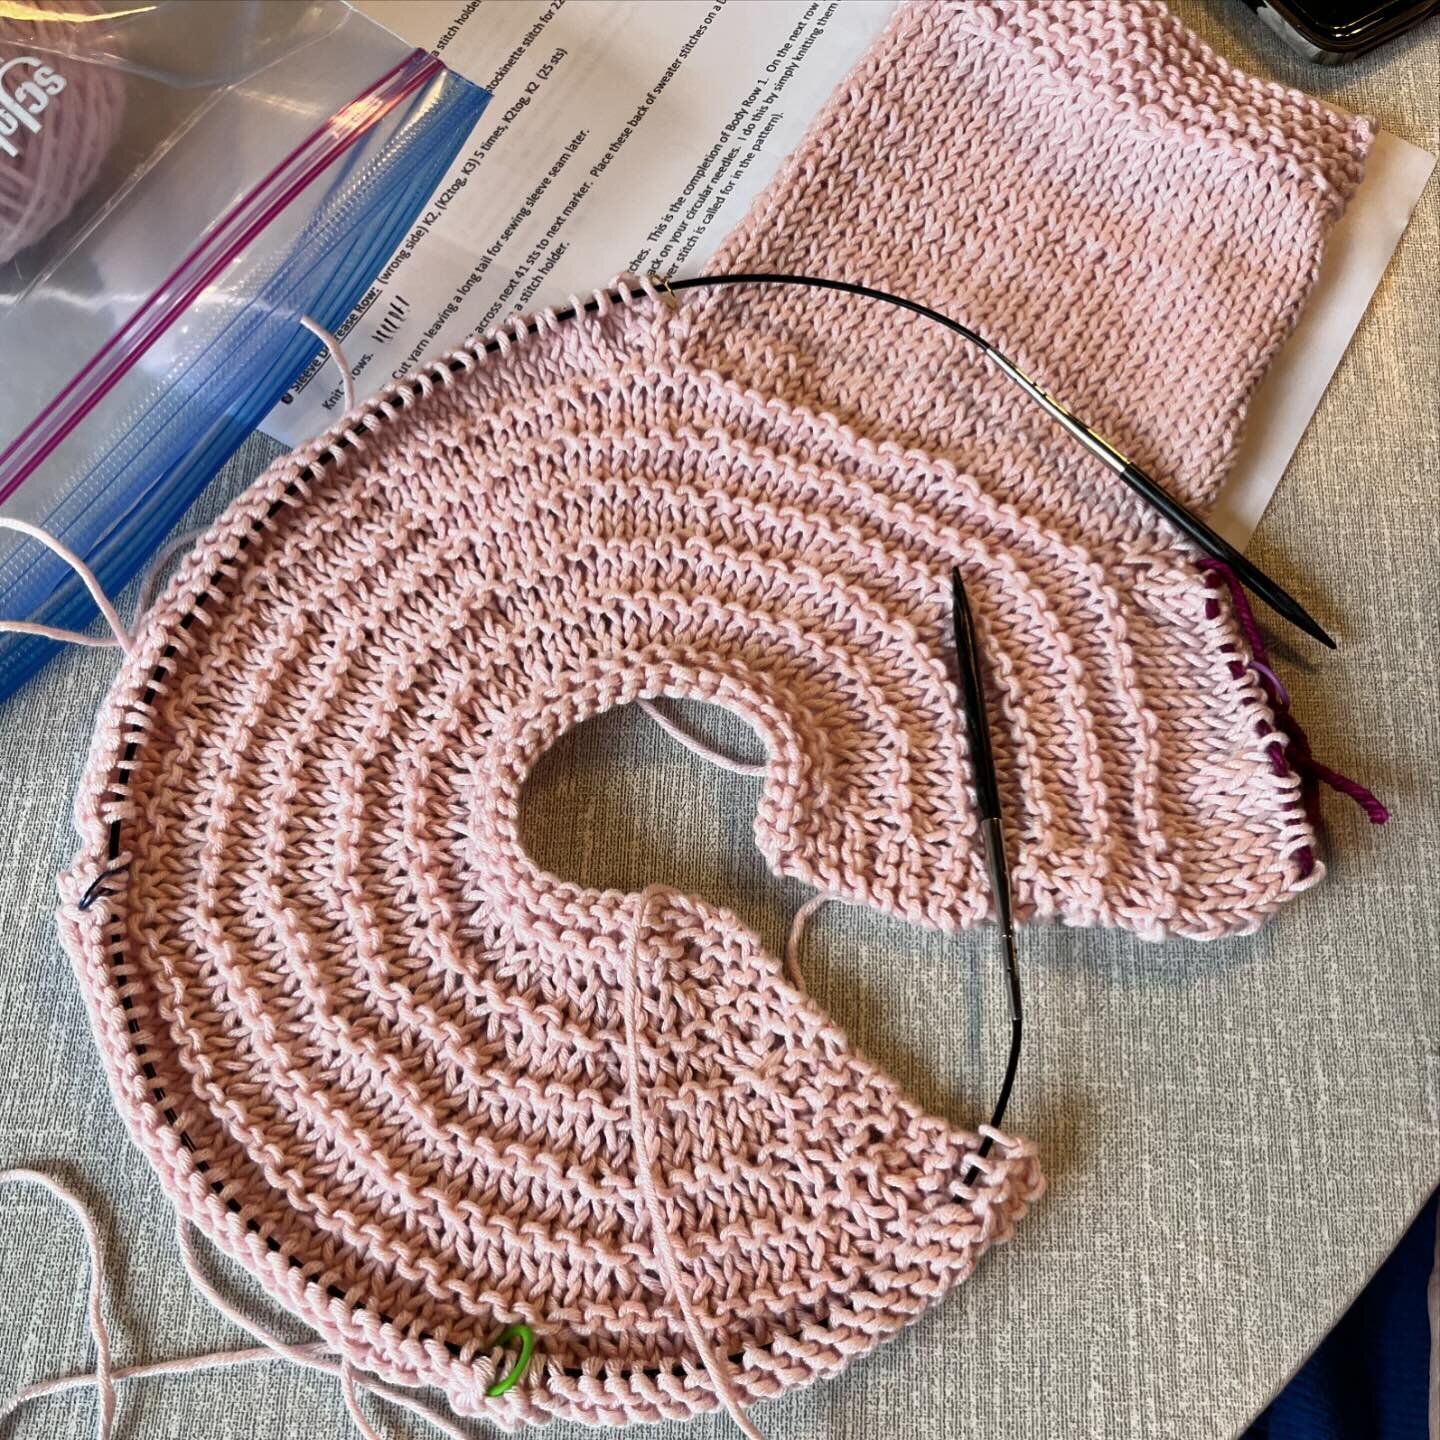 Happy #wipwednesday everyone!

Here, Barb is a little over two hours in on her #fivehourbabysweater 💖

And yes, that Is the sweetest shade I&rsquo;ve found pink 💖💖 (@berrocoyarn Modern Cotton)

#knitting #knitwithfriends #knitlocal #lys #perfectbl